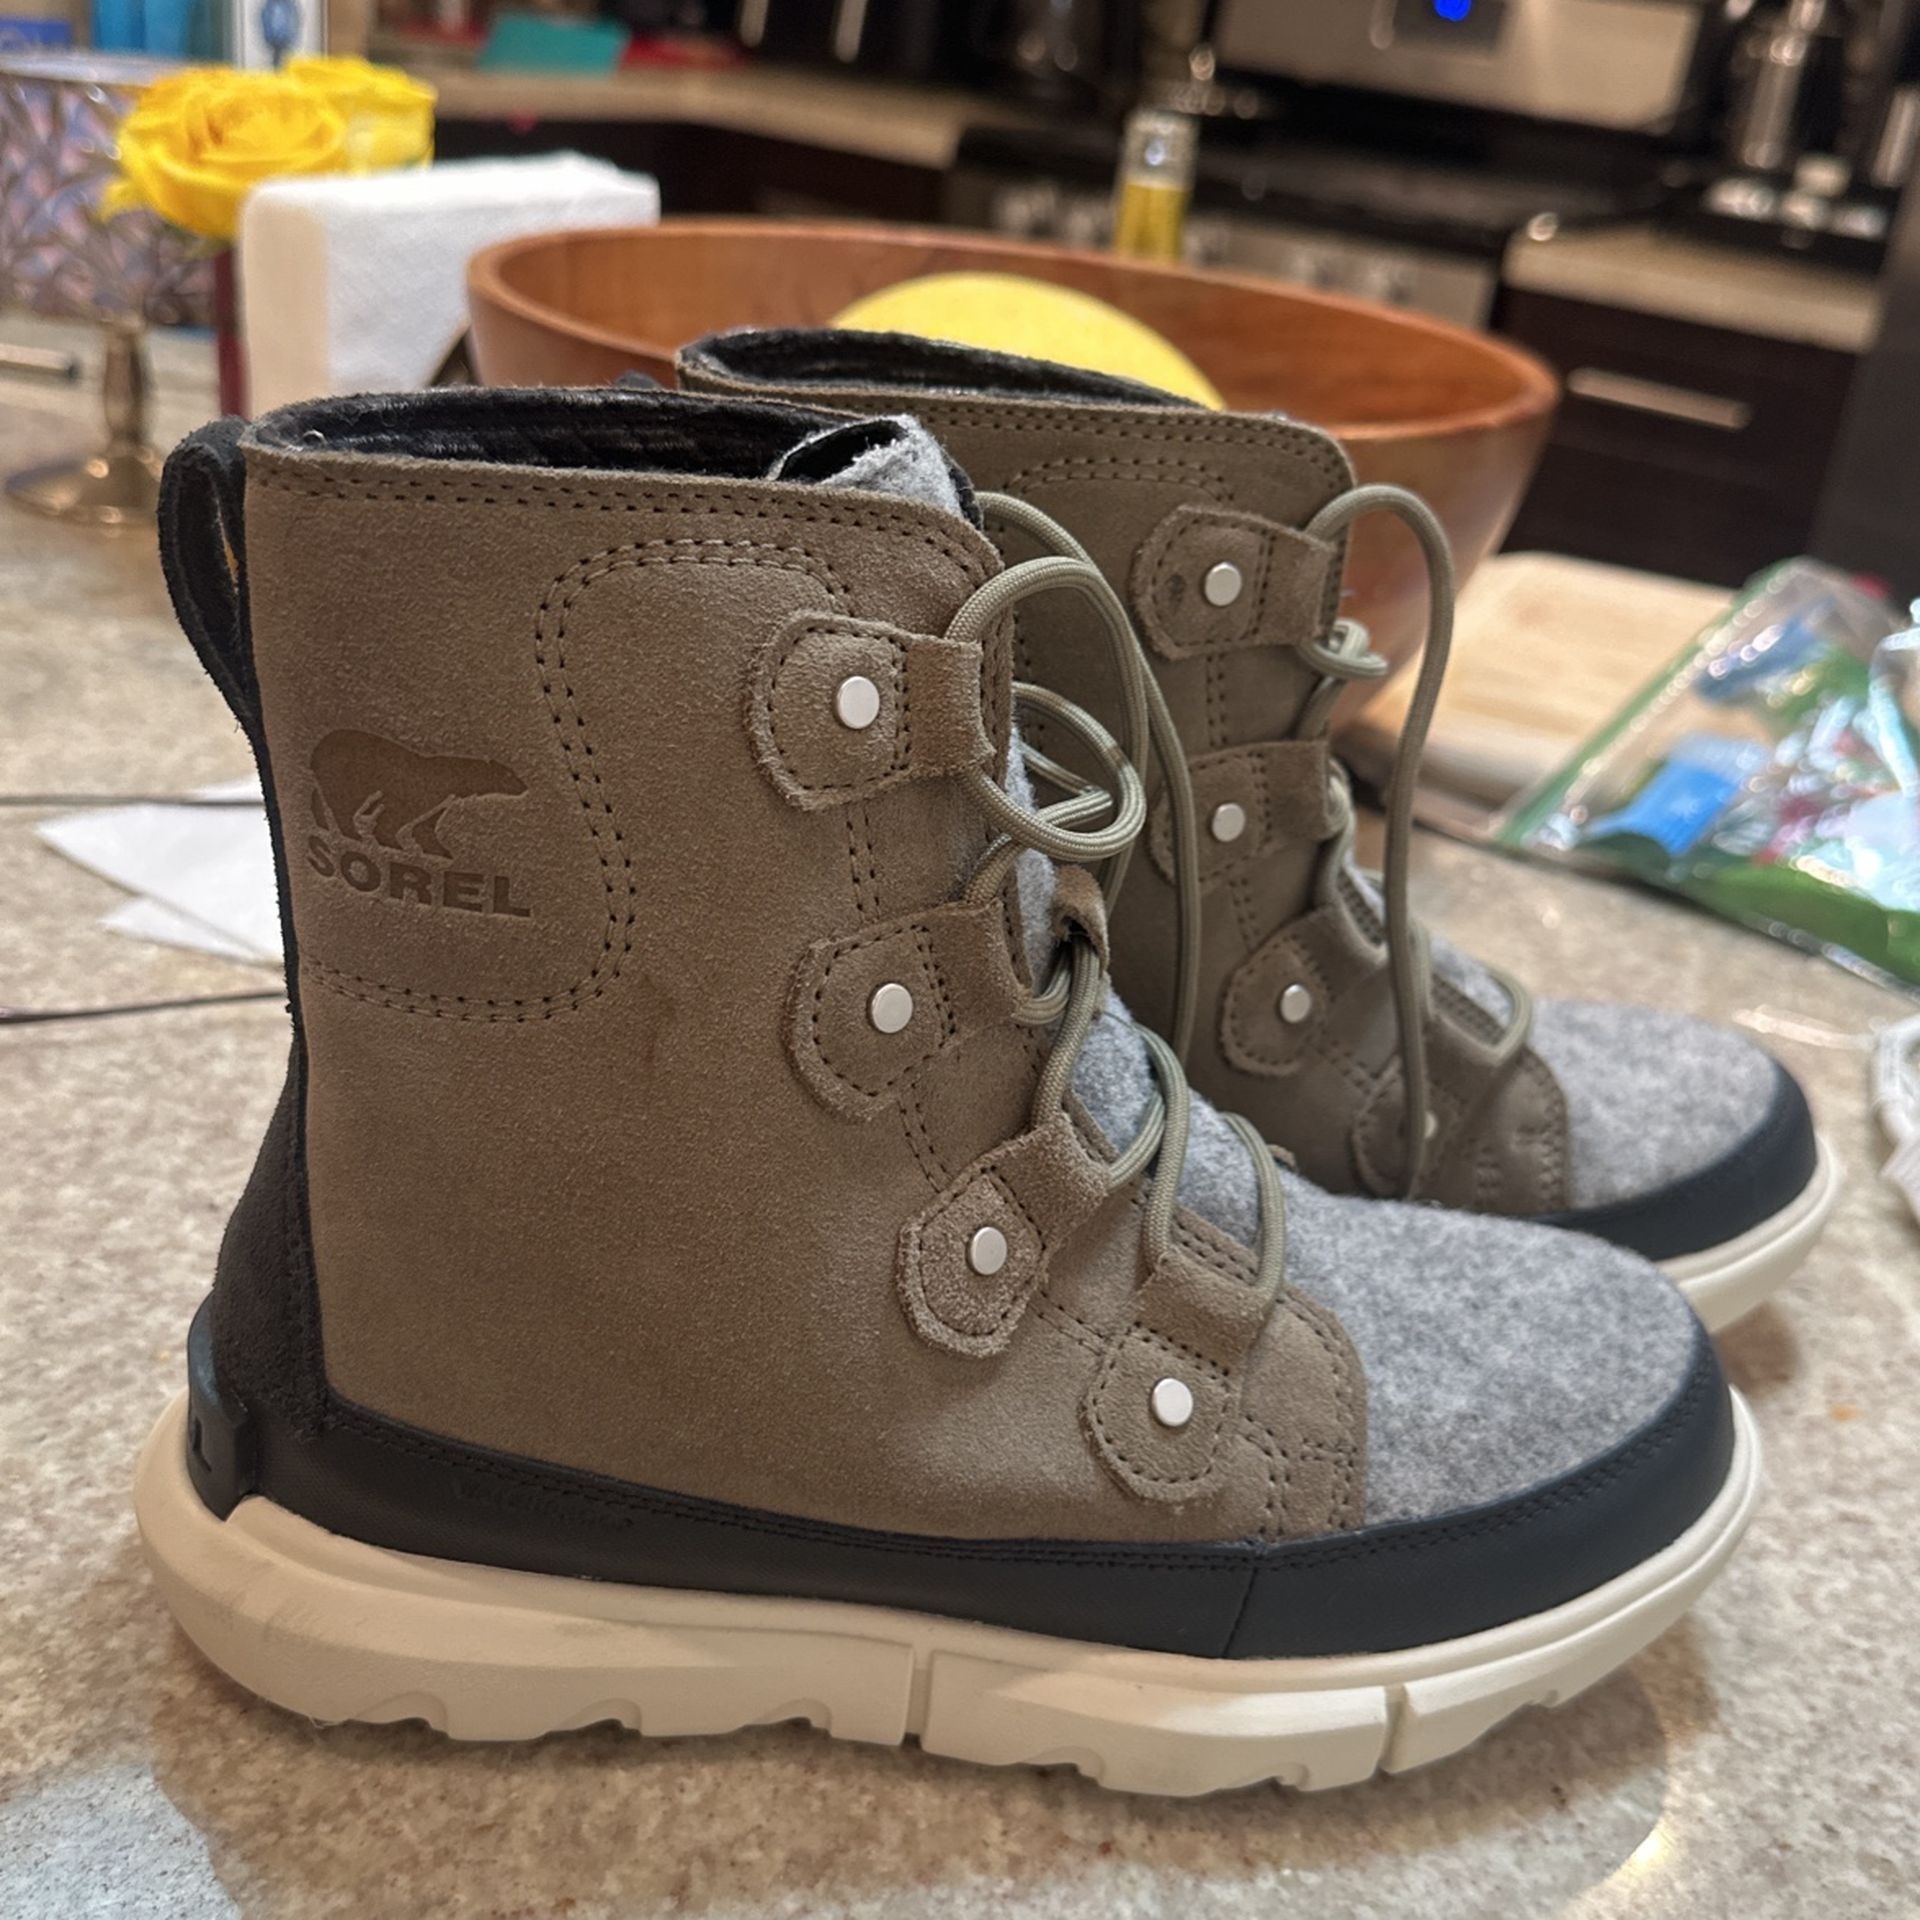 Sorel Insulated Waterproof Boots Size 6